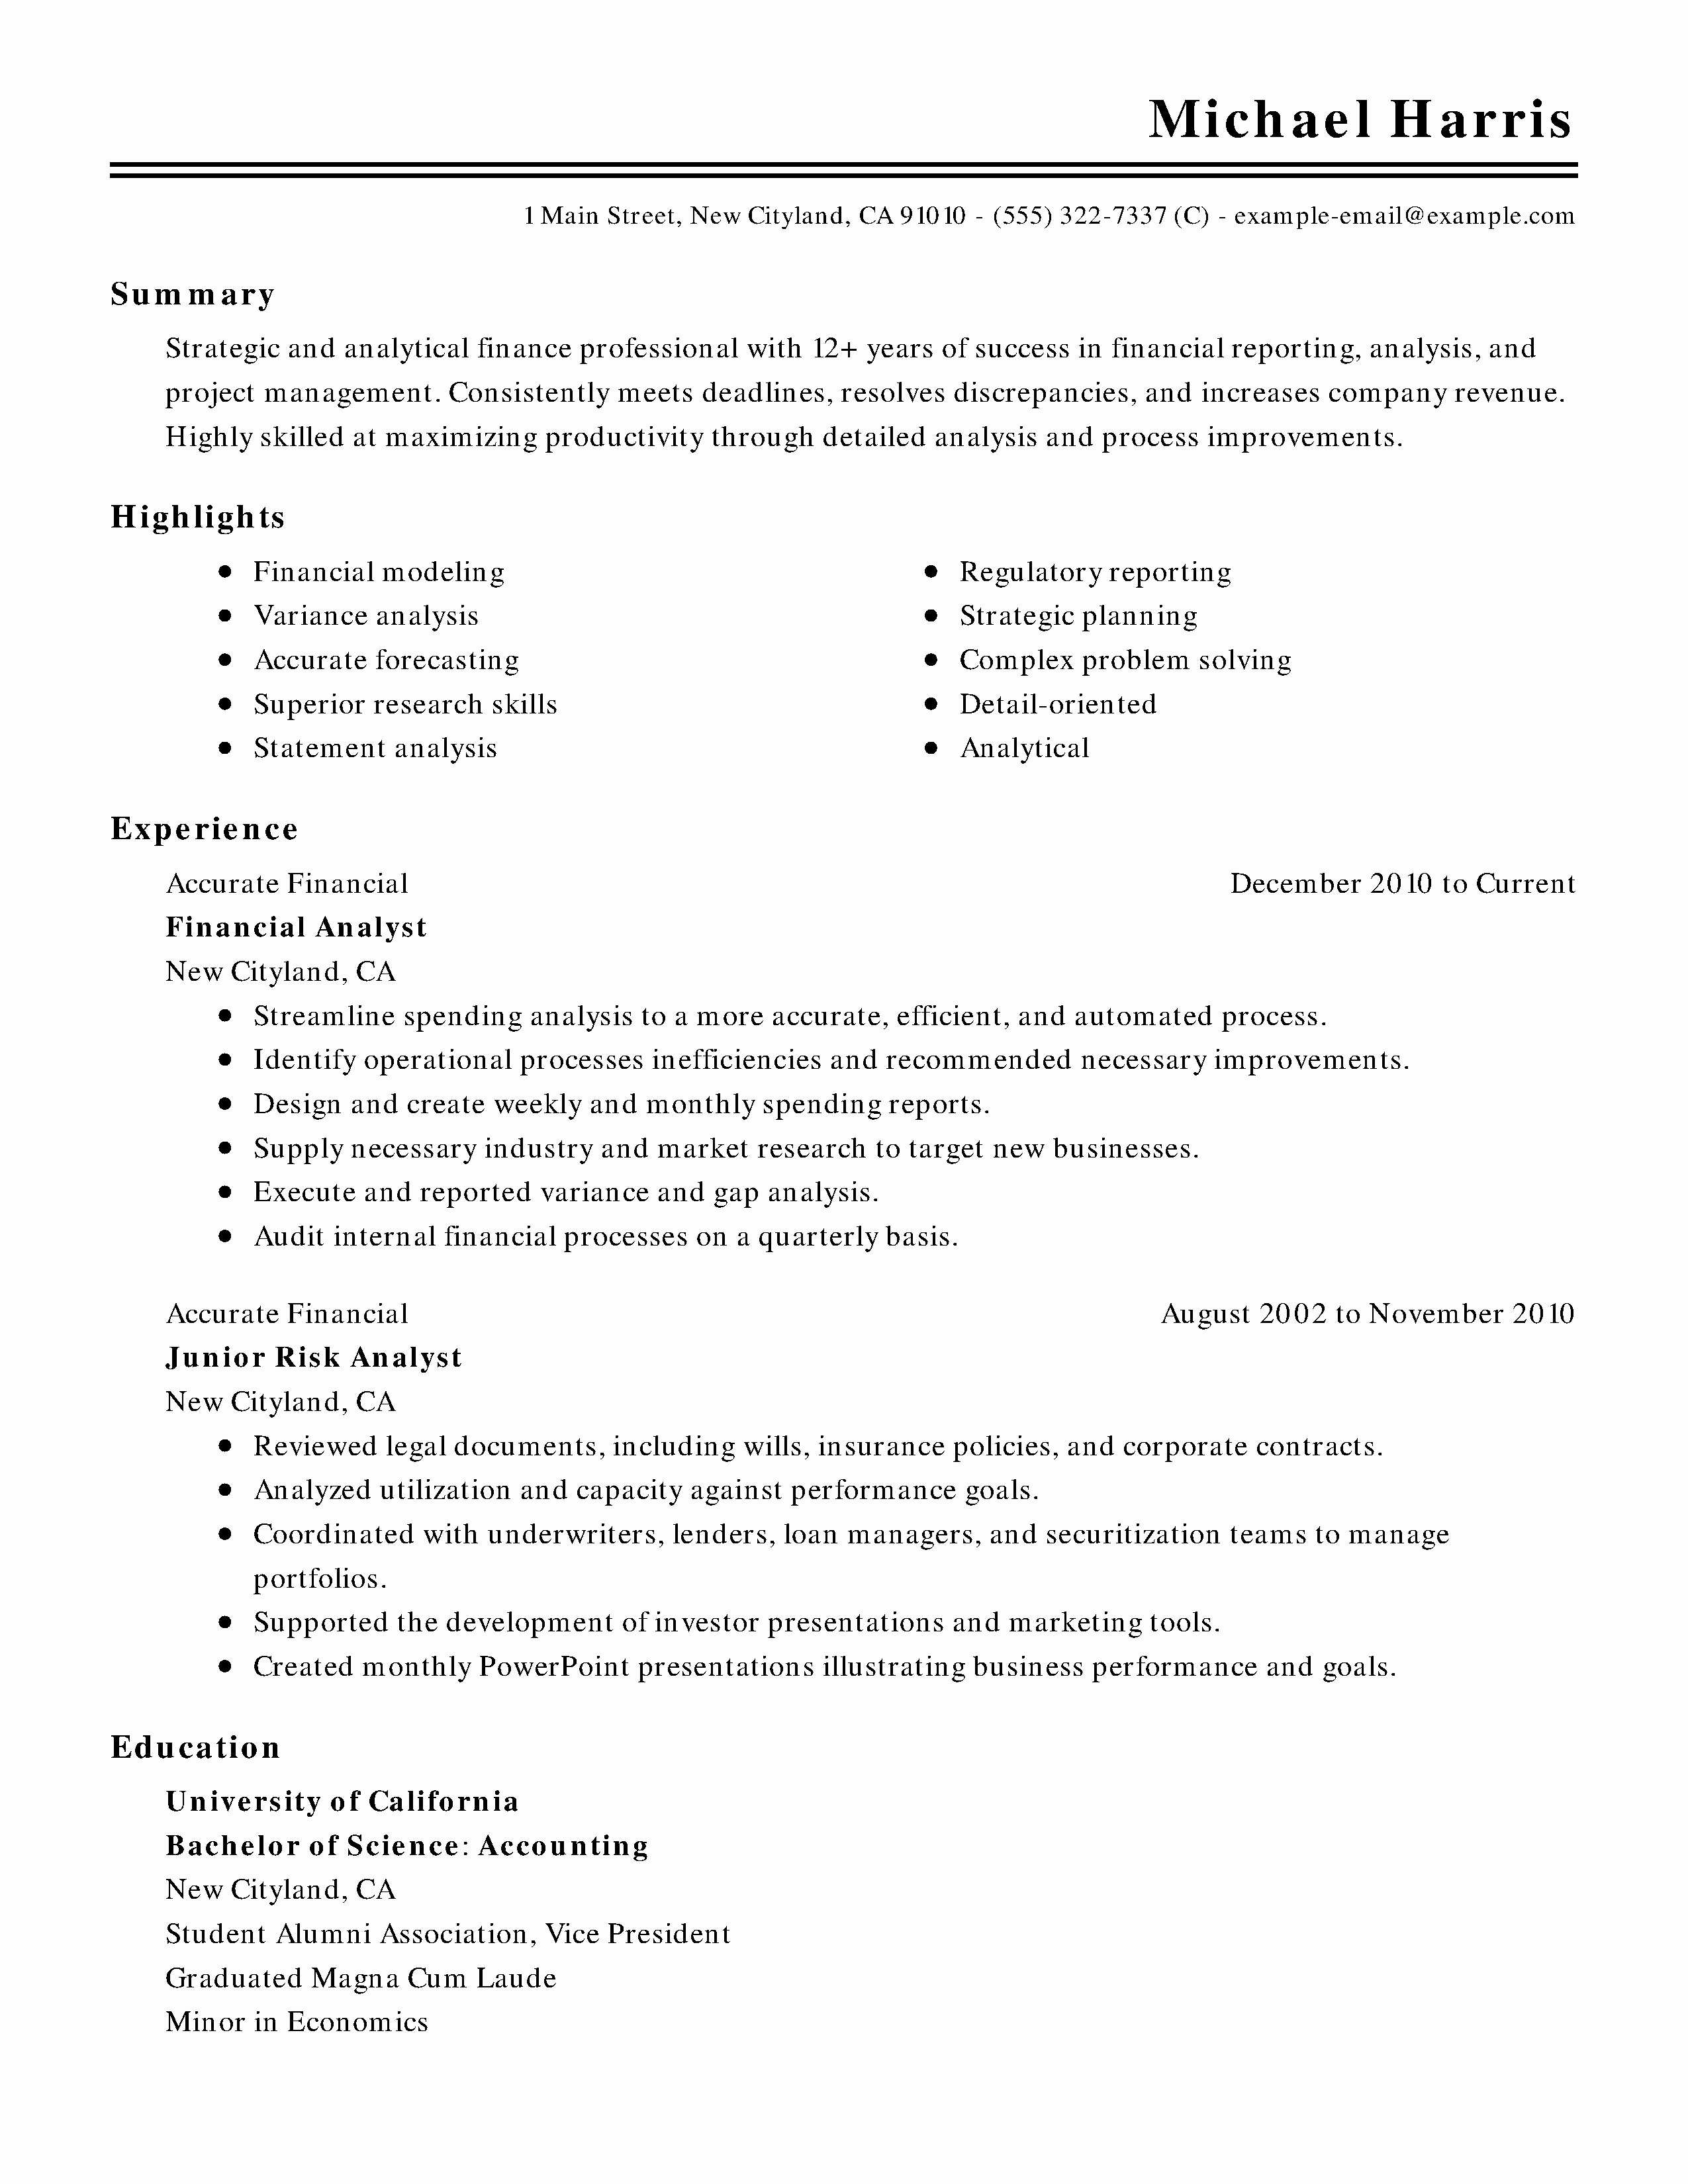 Microsoft Word Professional Resume Template Best Of Simple Accounting &amp; Finance Resume Examples